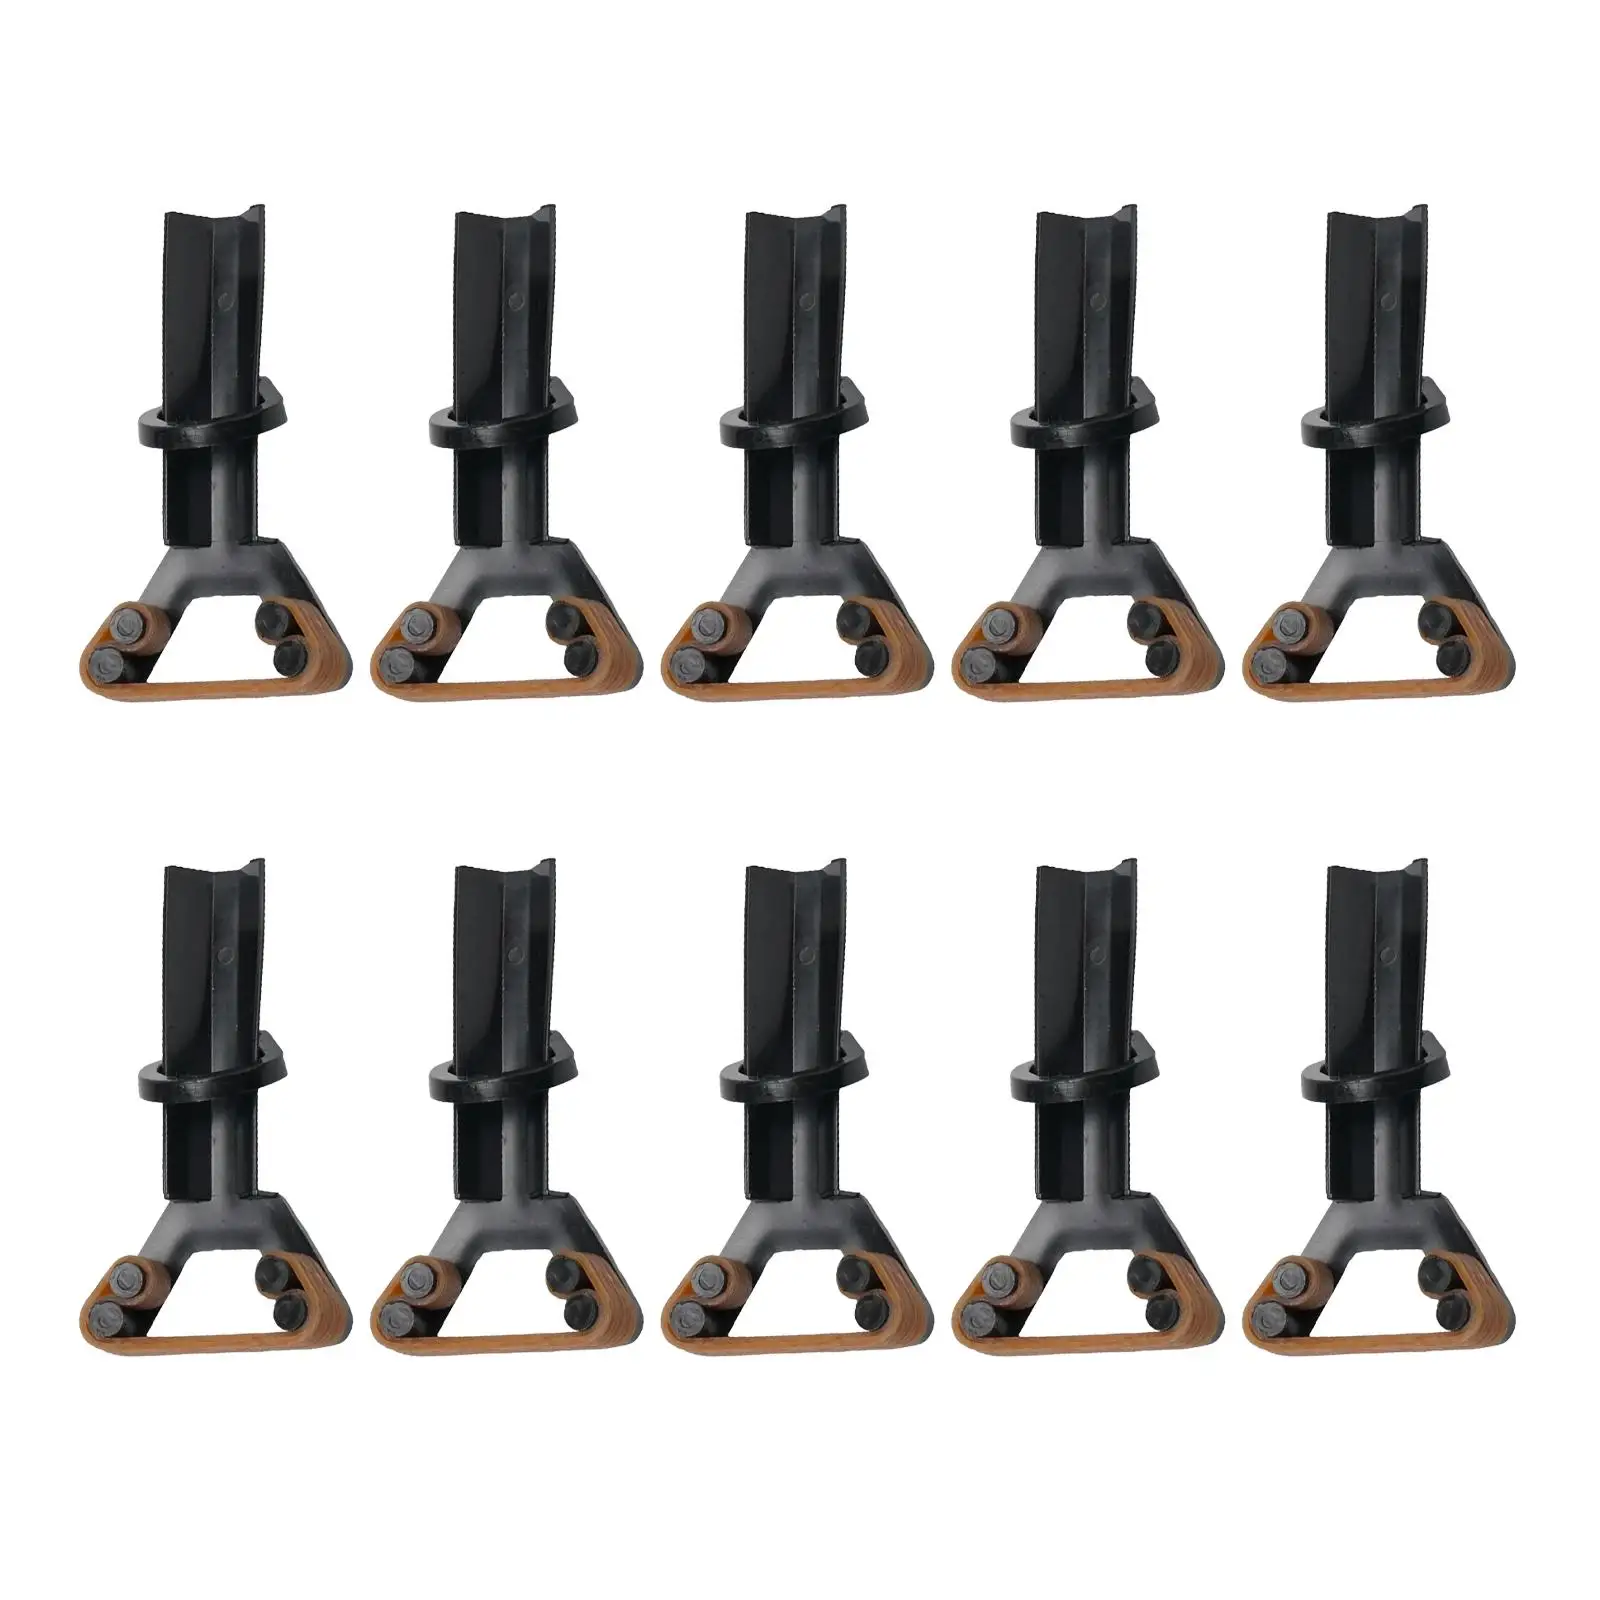 10Pcs Pool Cue Tip Clamp Lightweight Snooker Cue Tip Clamp Fastener Repair Tool for Club Indoor Competition Billiard Party